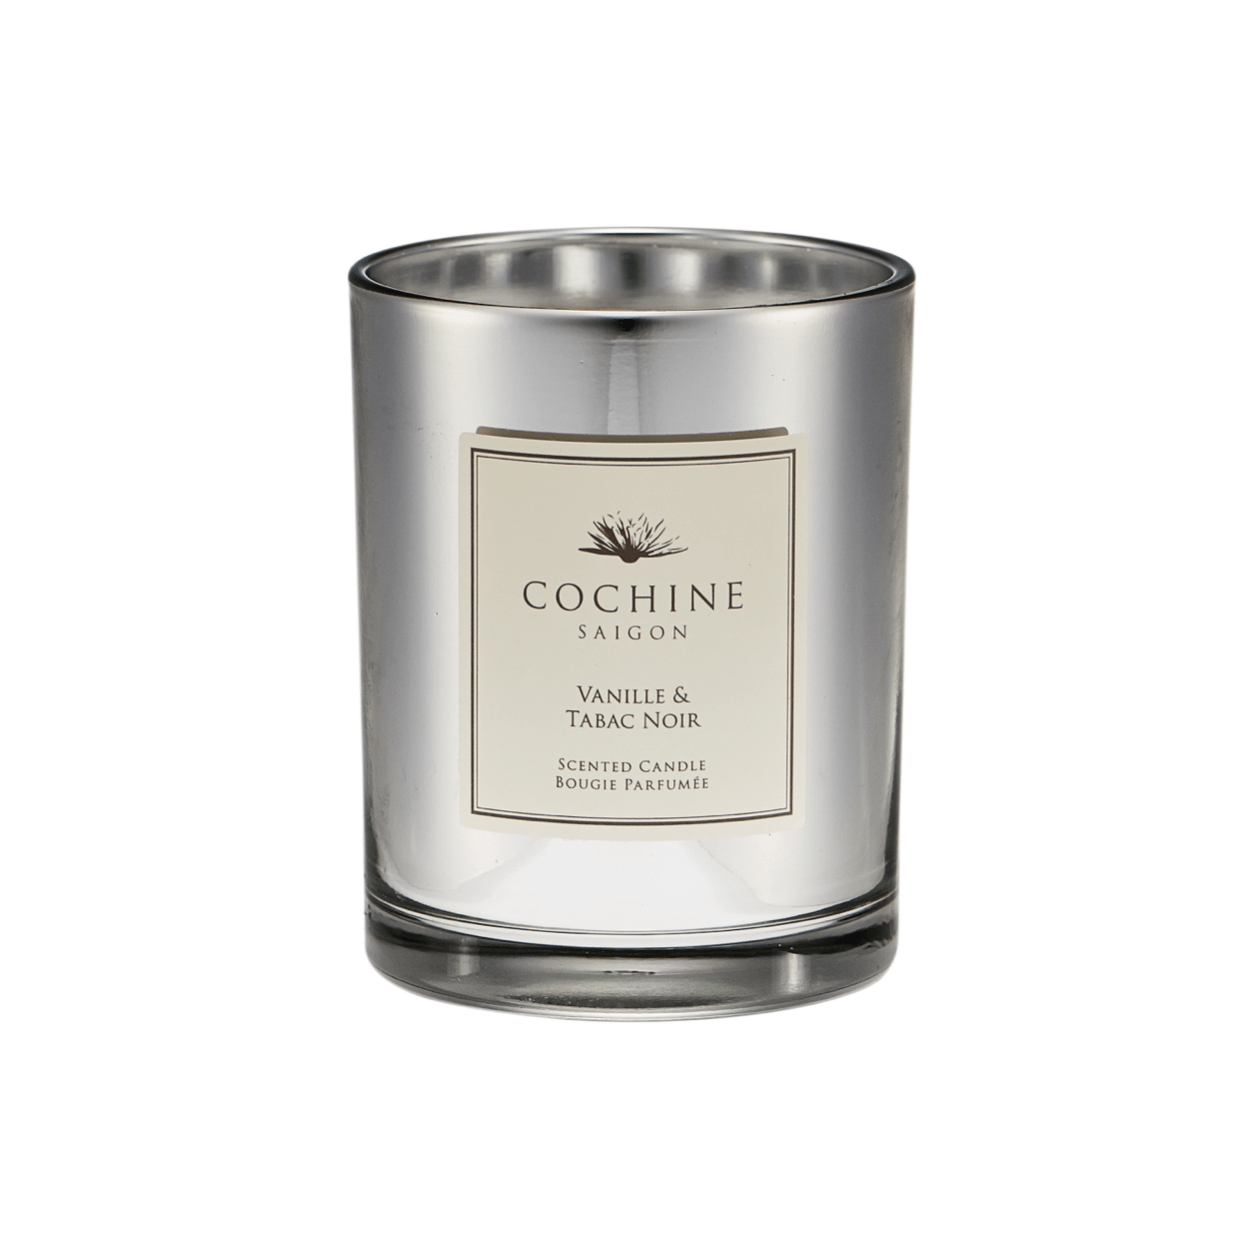 Cochine Home Fragrances of Cochines luxury scented candles and Cochine reed diffuers in Cochine Vanille & Tabac Noir Candle